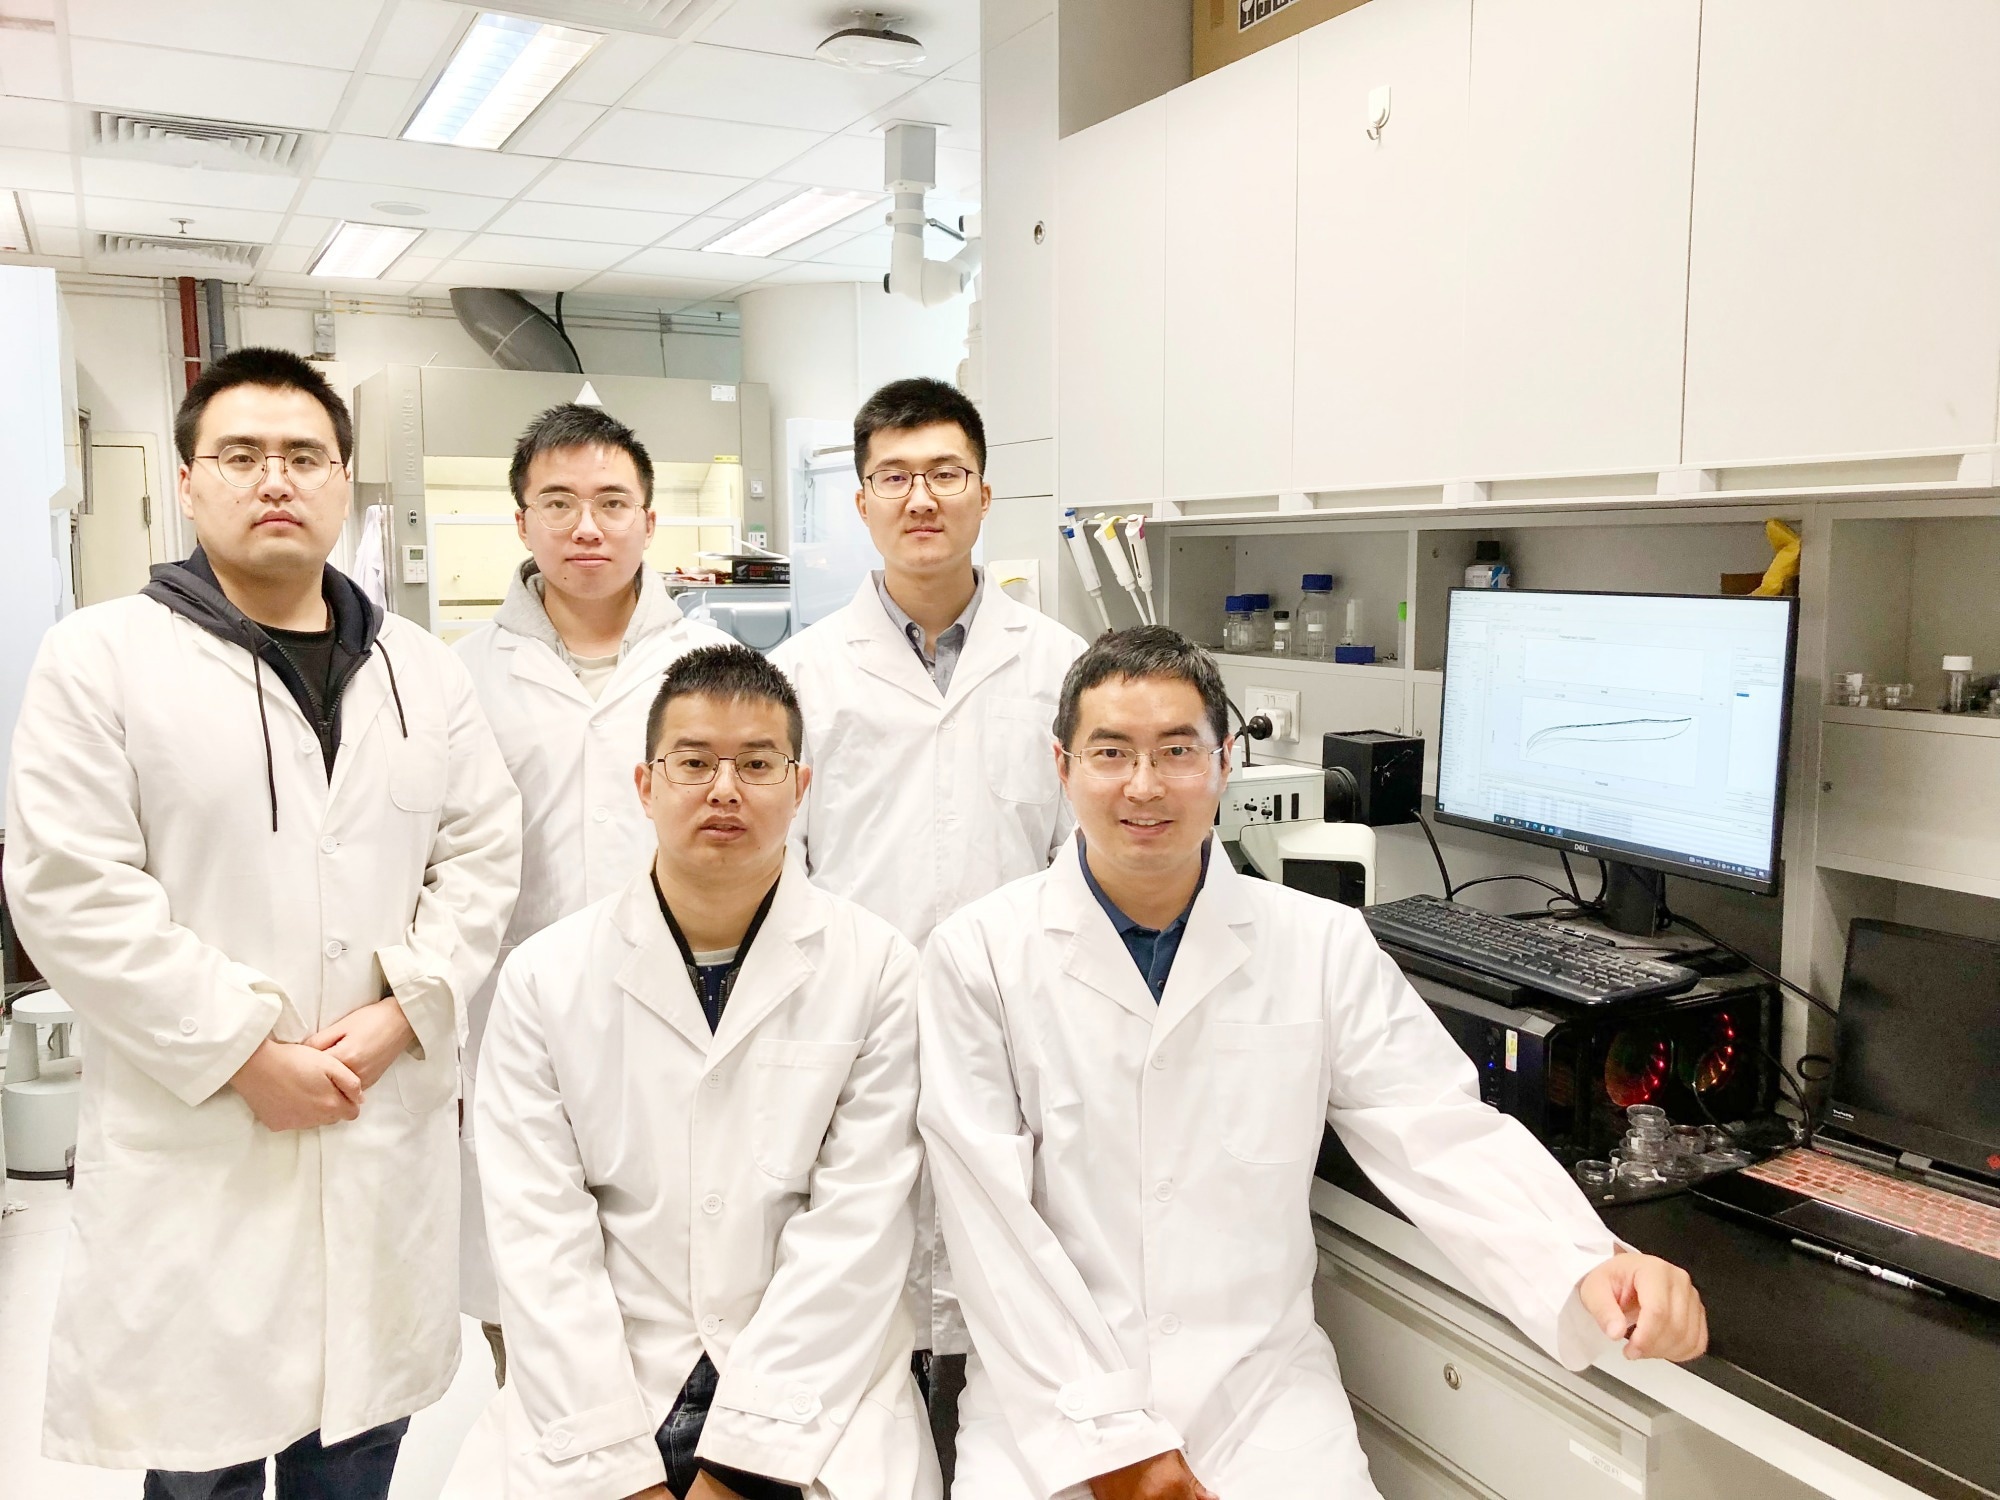 Dr Zeng Zhiyuan (front row, right) and his research group from the Department of Materials Science and Engineering at City University of Hong Kong. (© City University of Hong Kong)